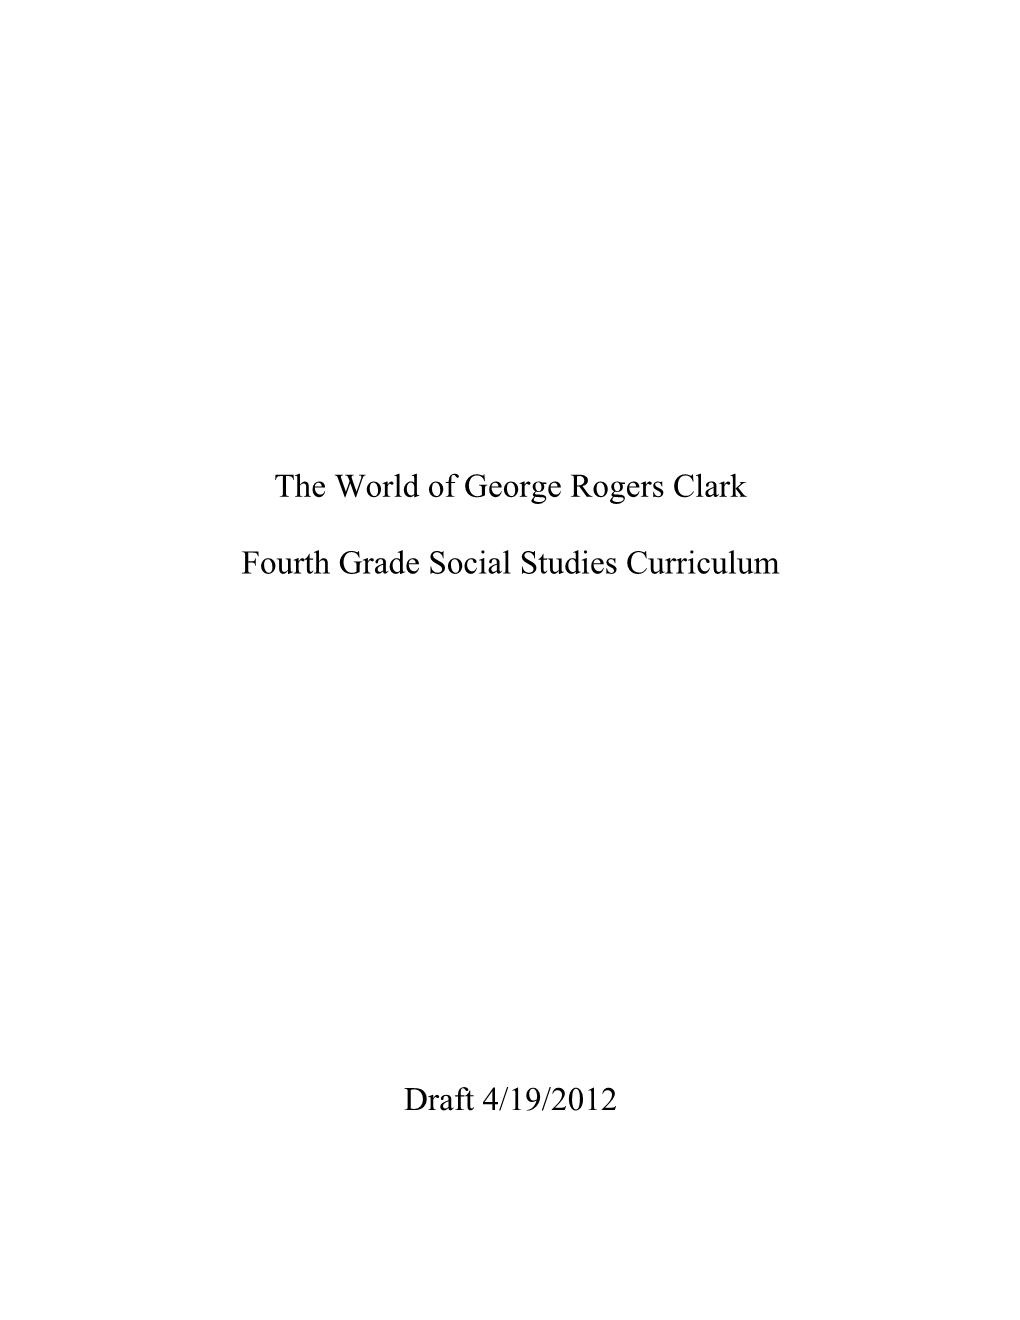 The World of George Rogers Clark